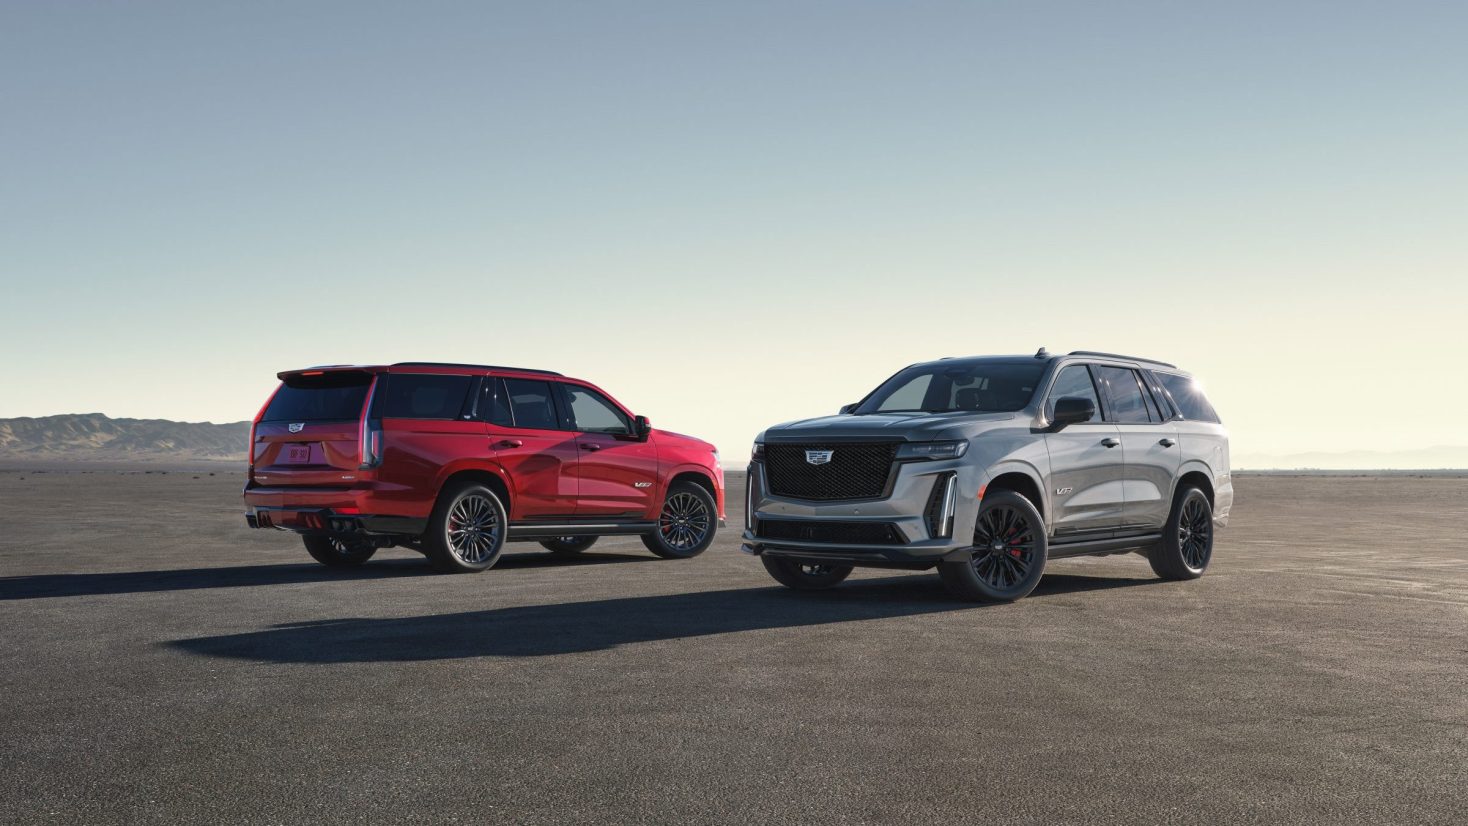 The Luxury SUVs for Your Next Car Purchase